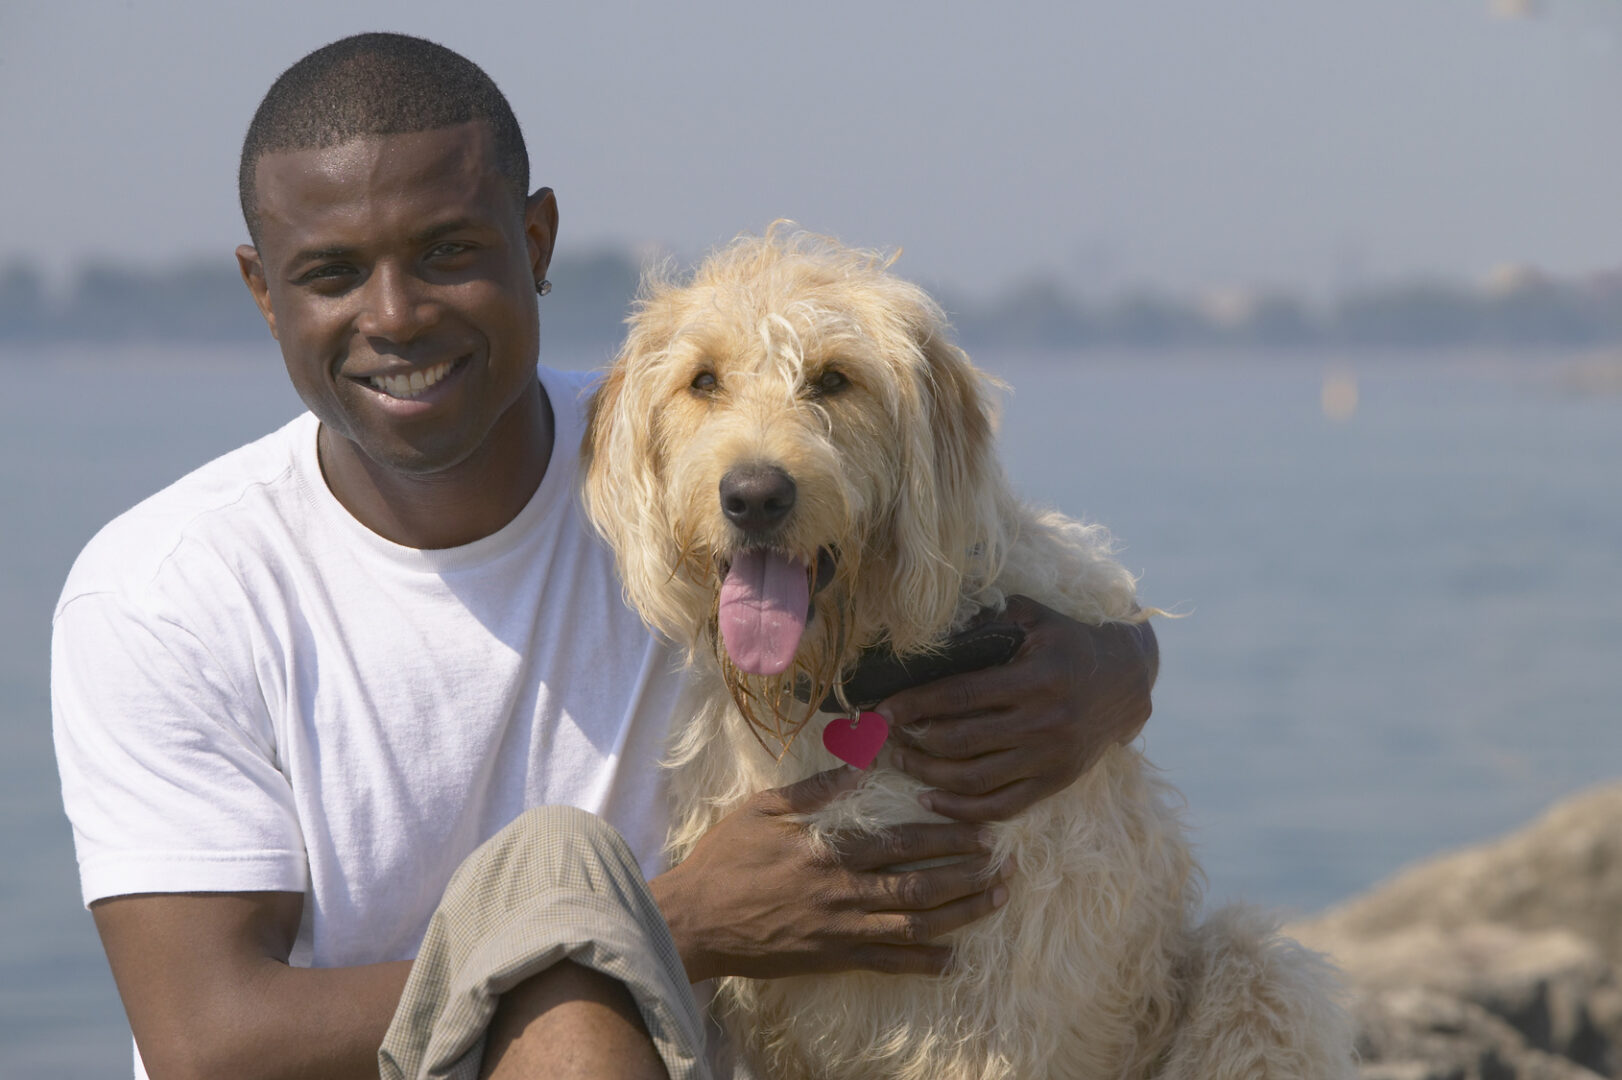 A man wearing a white shirt and a dog